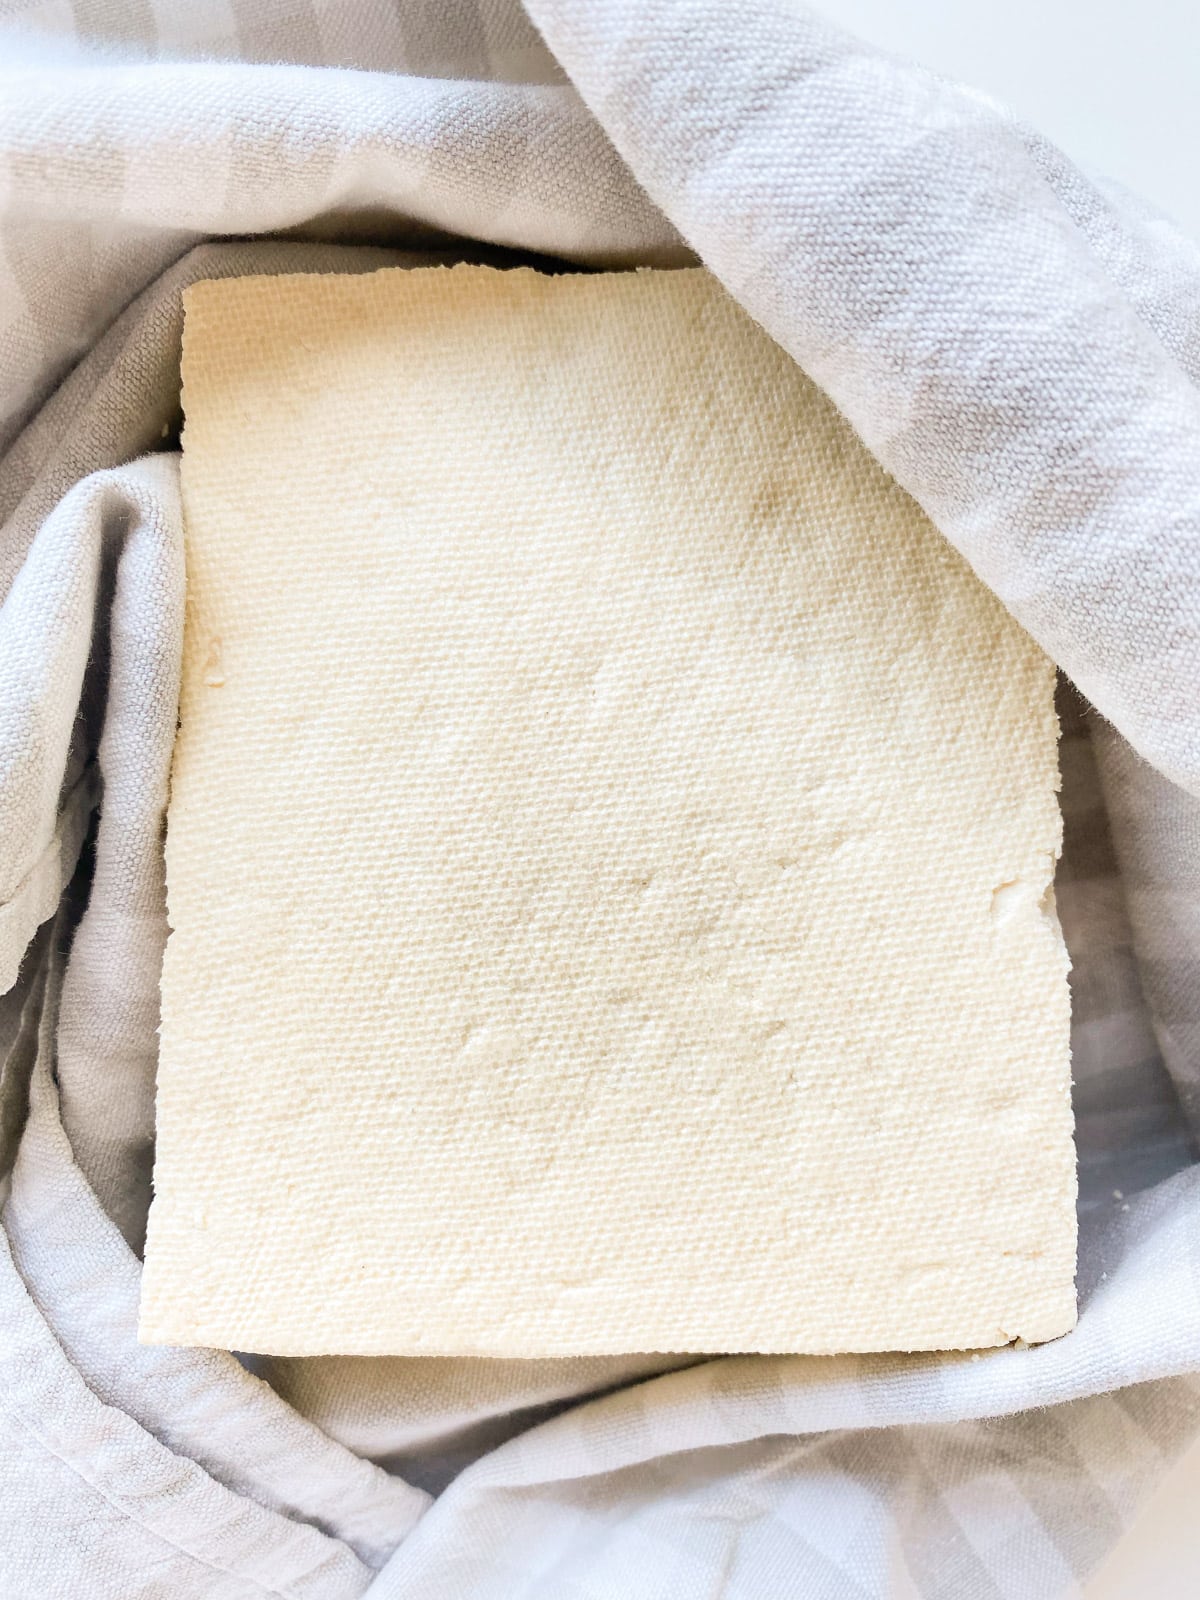 An image of a block of tofu being dried in a clean tea towel.